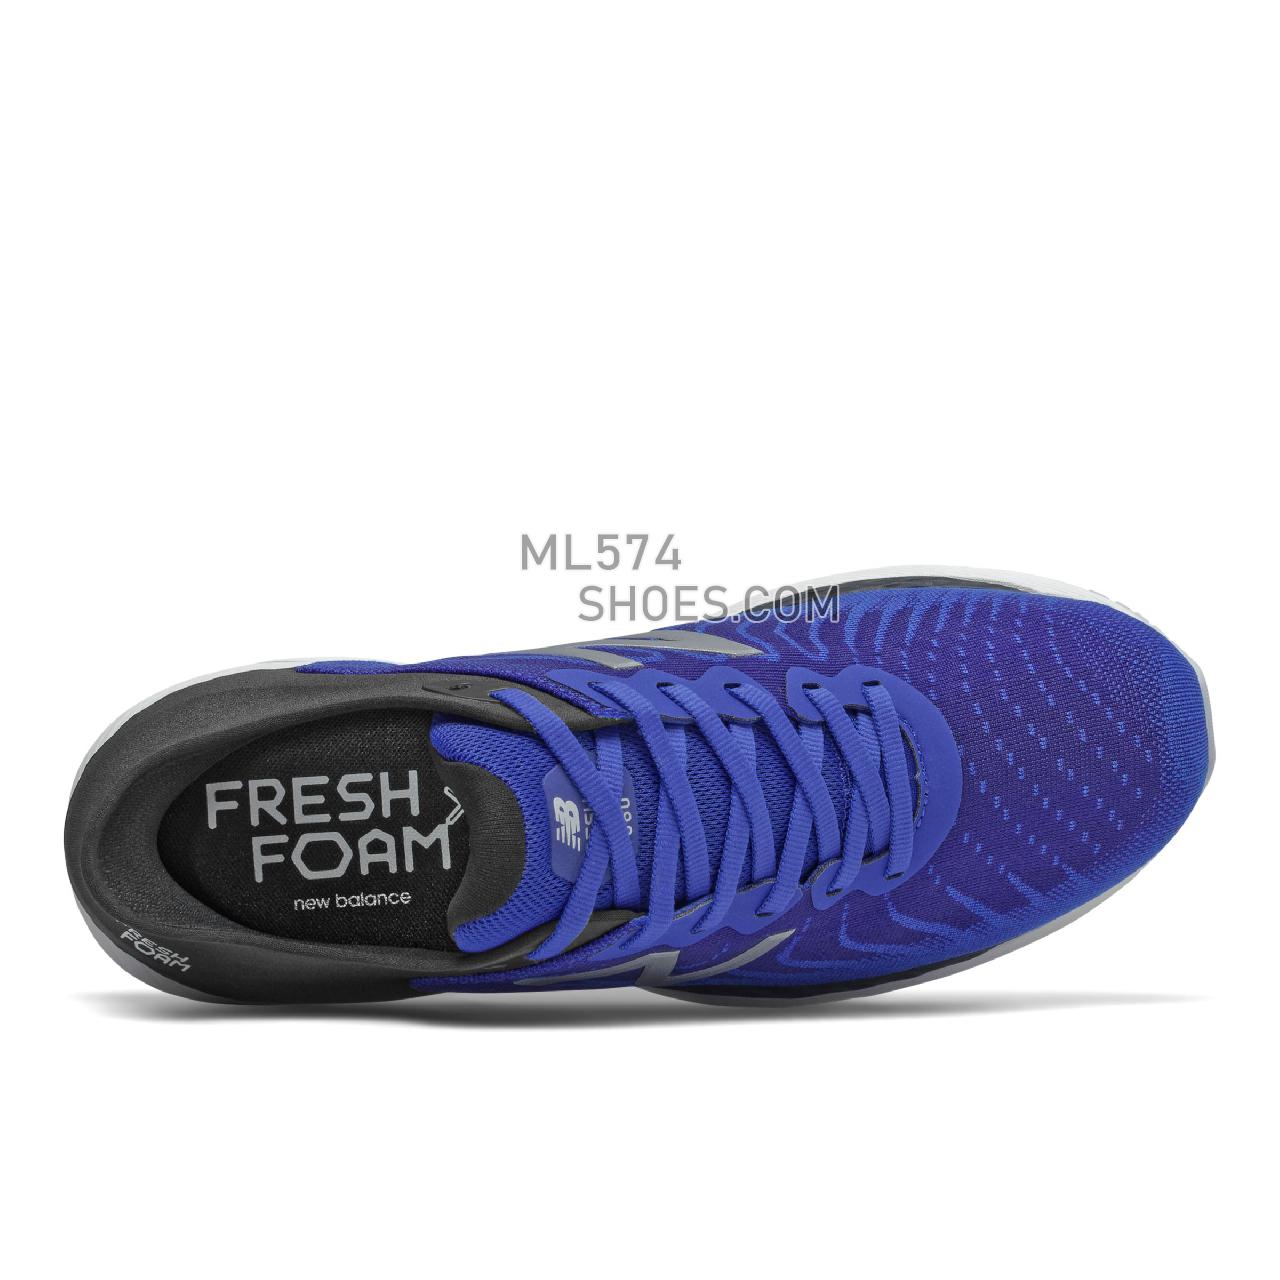 New Balance Fresh Foam 860v11 - Men's Stability Running - Team Royal with Black and Energy Lime - M860F11